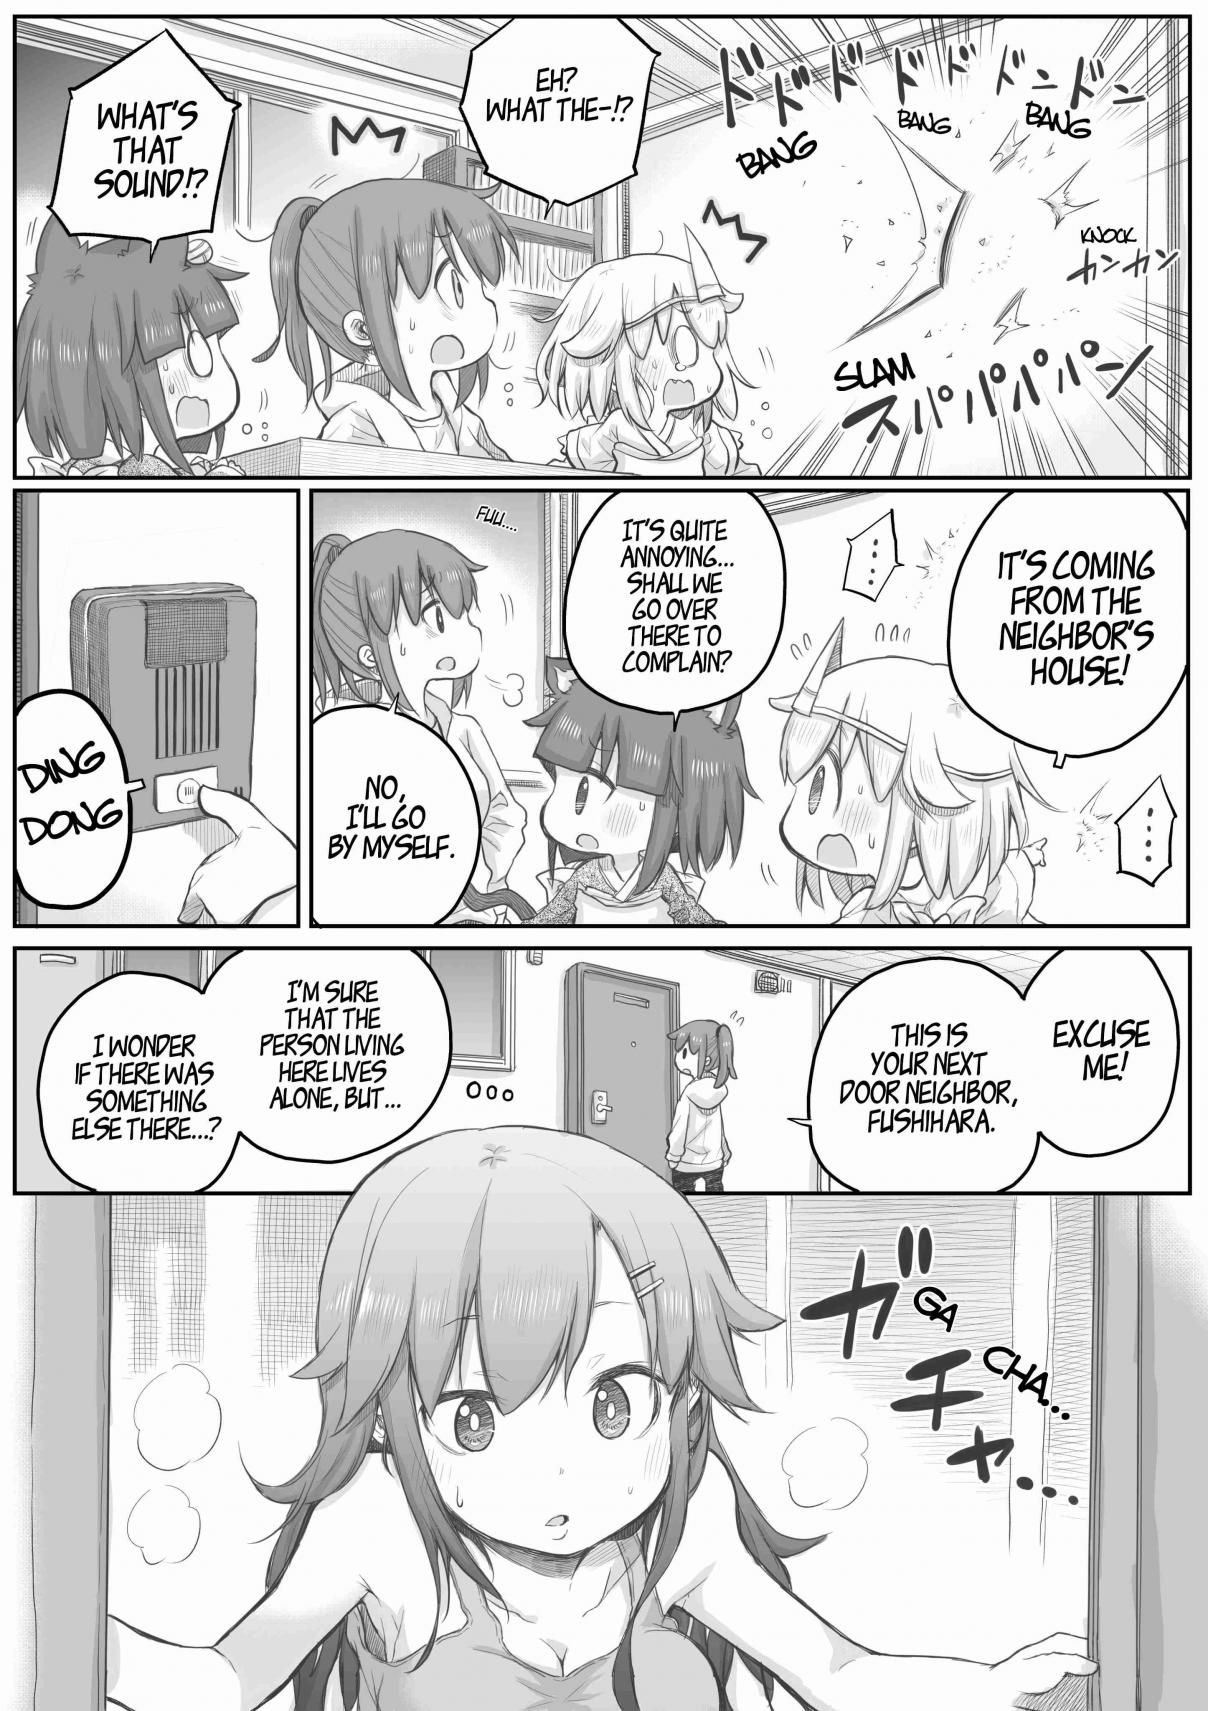 Ms. Corporate Slave Wants to be Healed by a Loli Spirit Vol. 1 Ch. 25